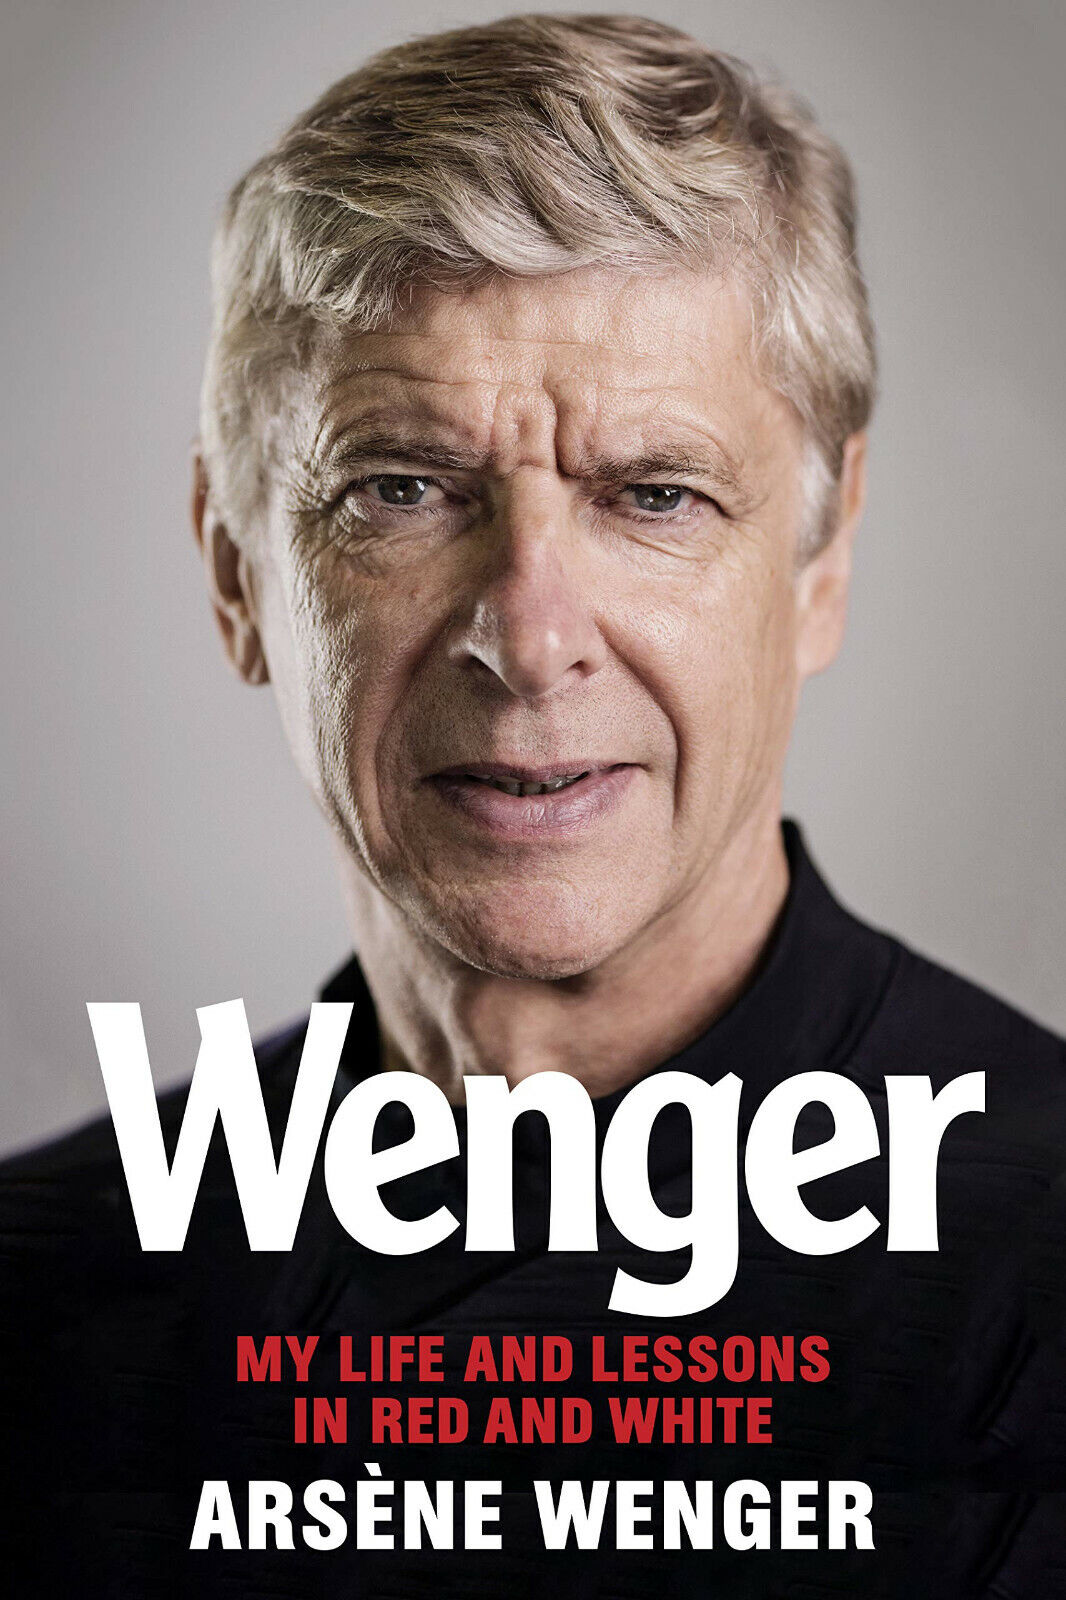 Wenger: My Life and Lessons in Red and White - Jason Naylor - 2020